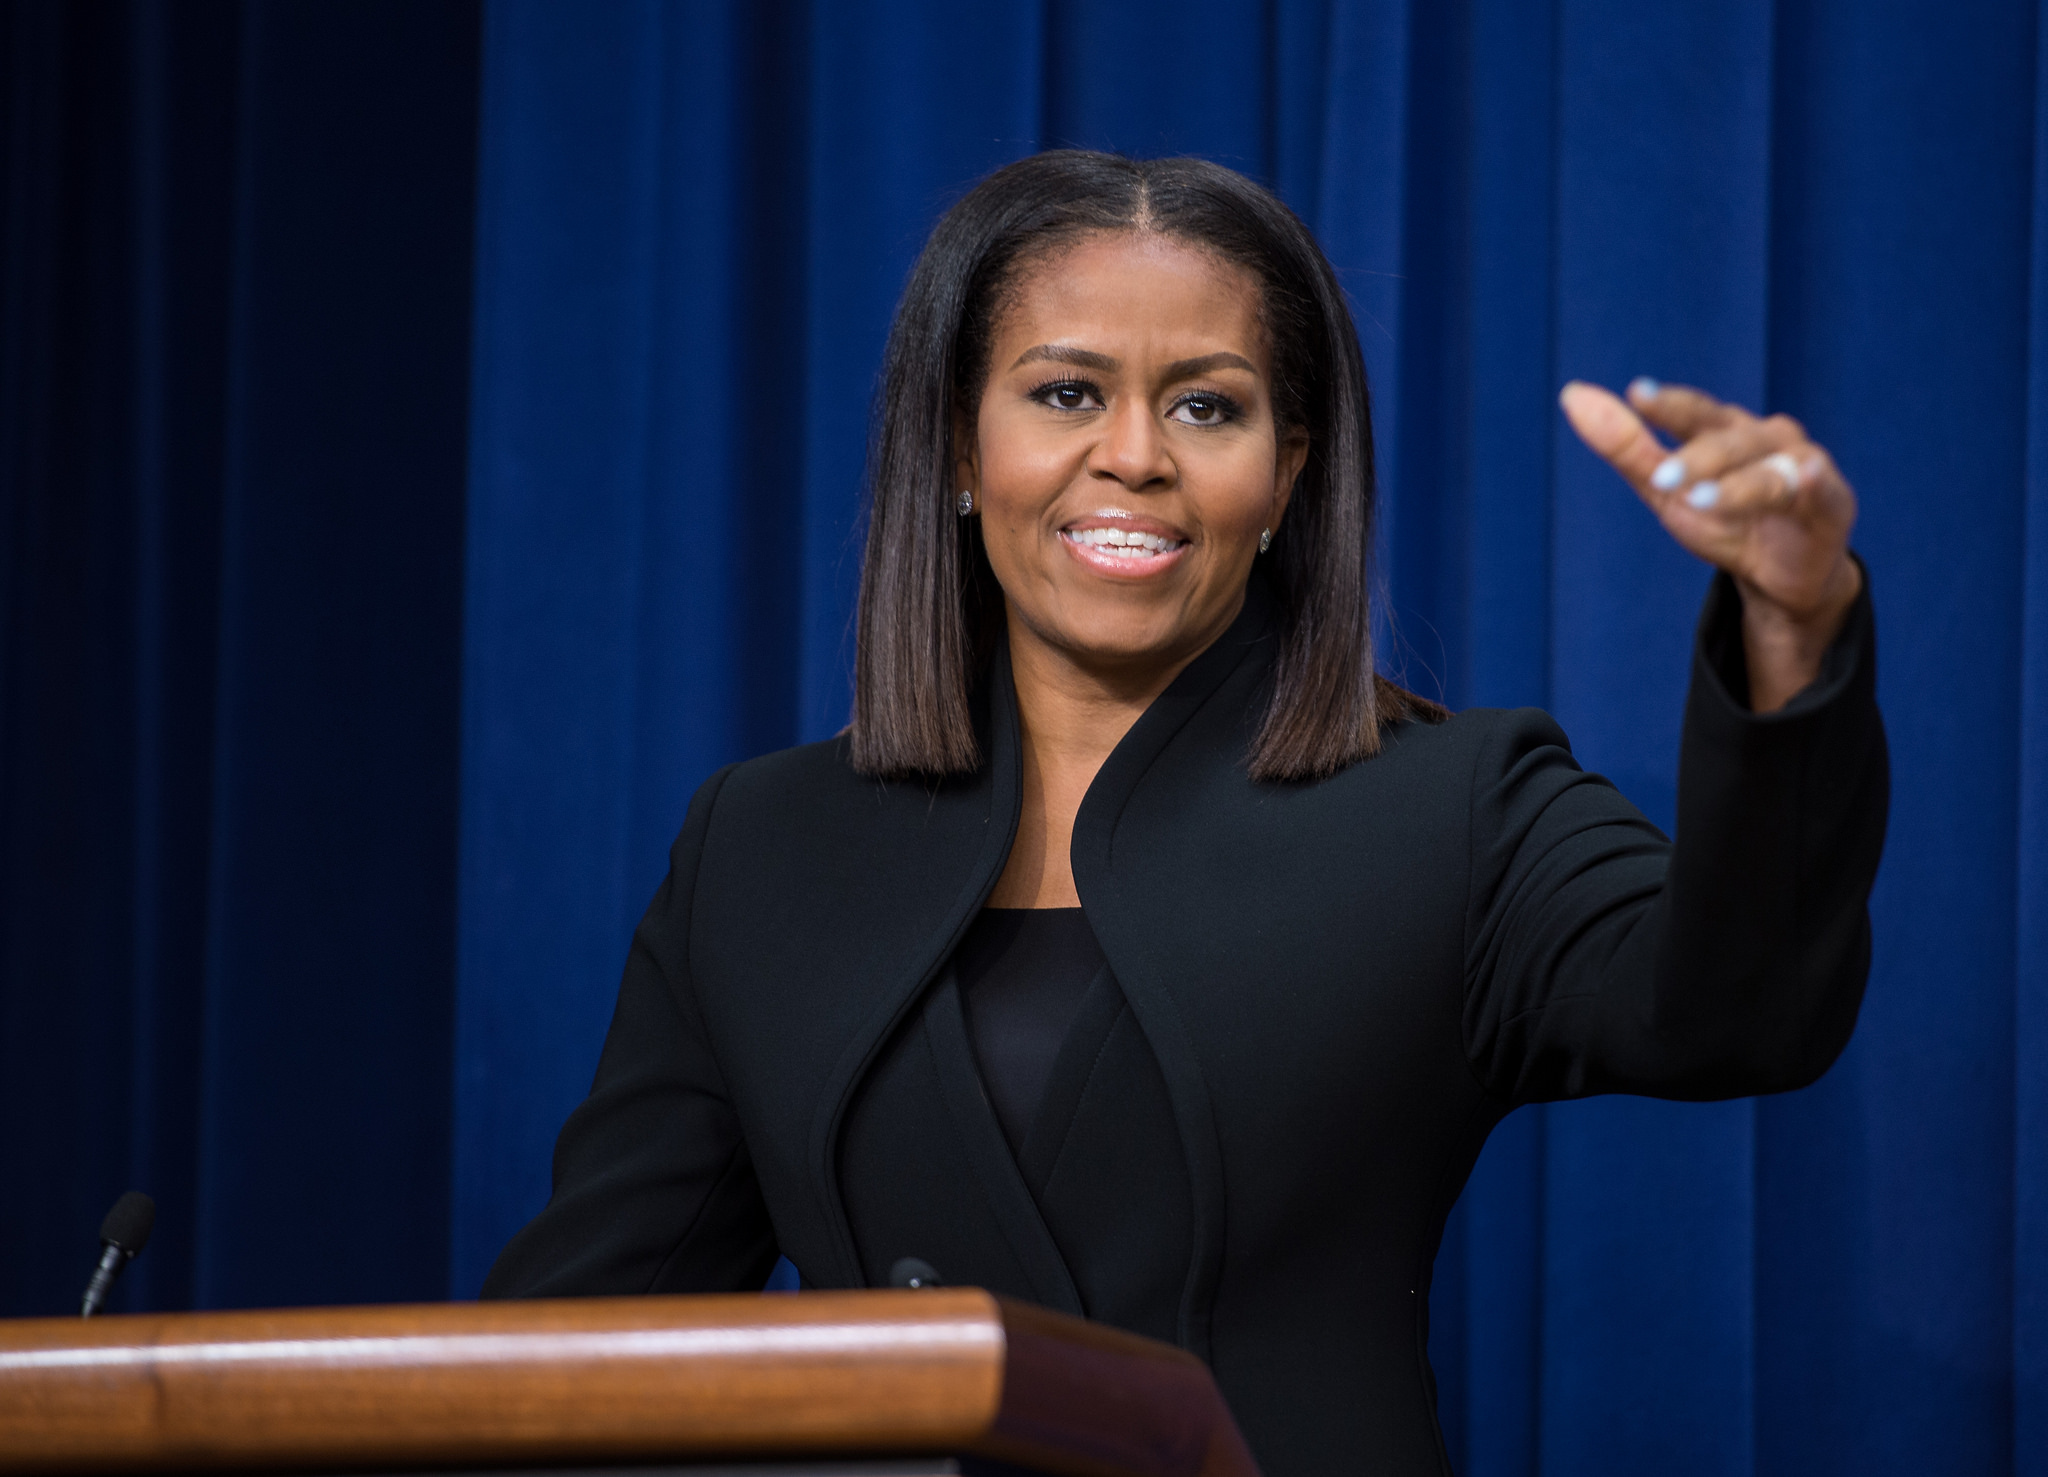 First Lady Michelle Obama speaks after a screening of the film “Hidden Figures” at the White House. (Photo credit: NASA)